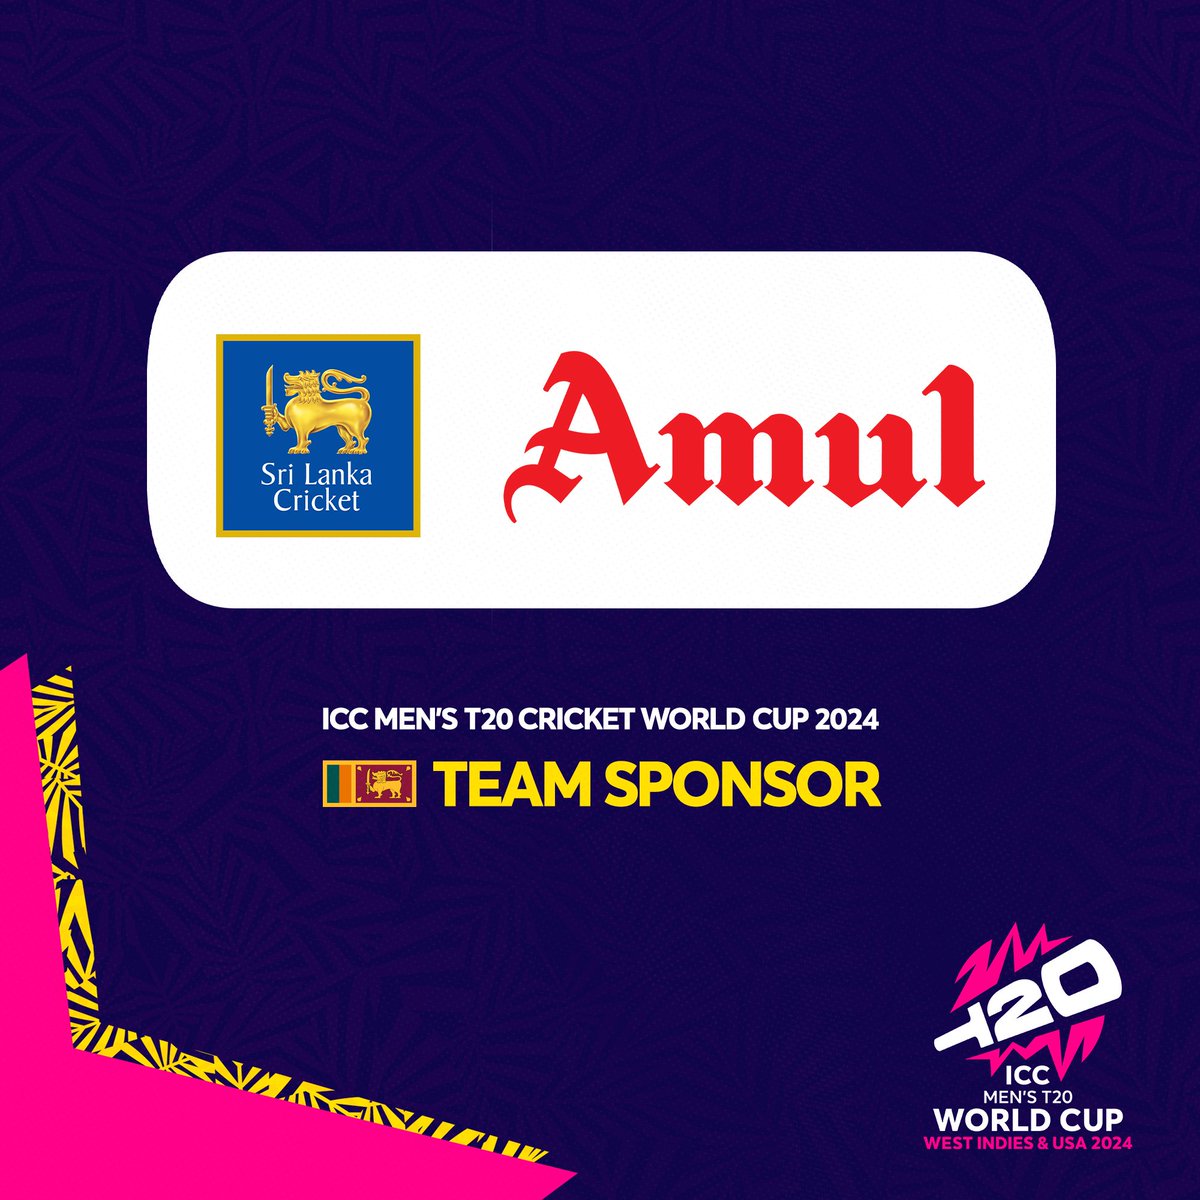 Sri Lanka Cricket (SLC) wishes to announce the appointment of Amul, a leading Indian milk producer with international presence, as the 'Official Sponsor' of the Sri Lanka Men's Team for the duration of the ICC Men's #T20WorldCup 2024.